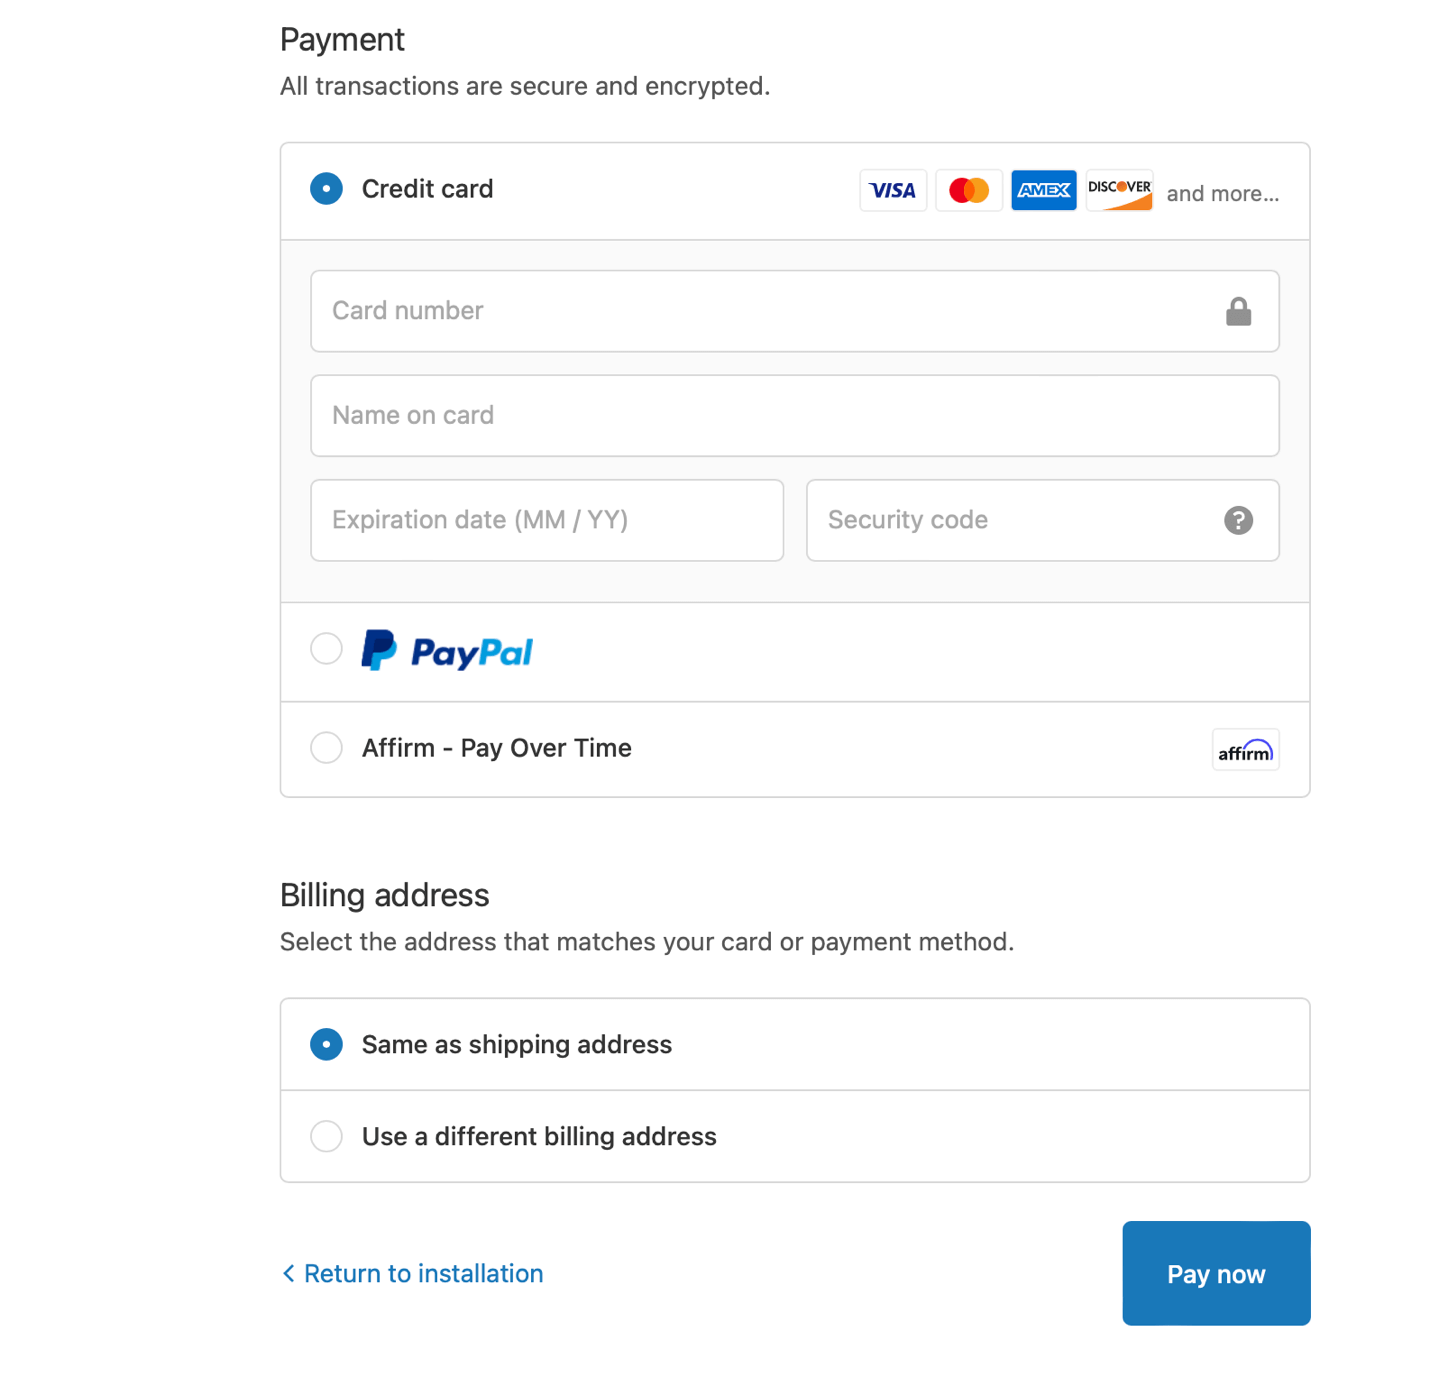 Springfree Trampoline's payment screen